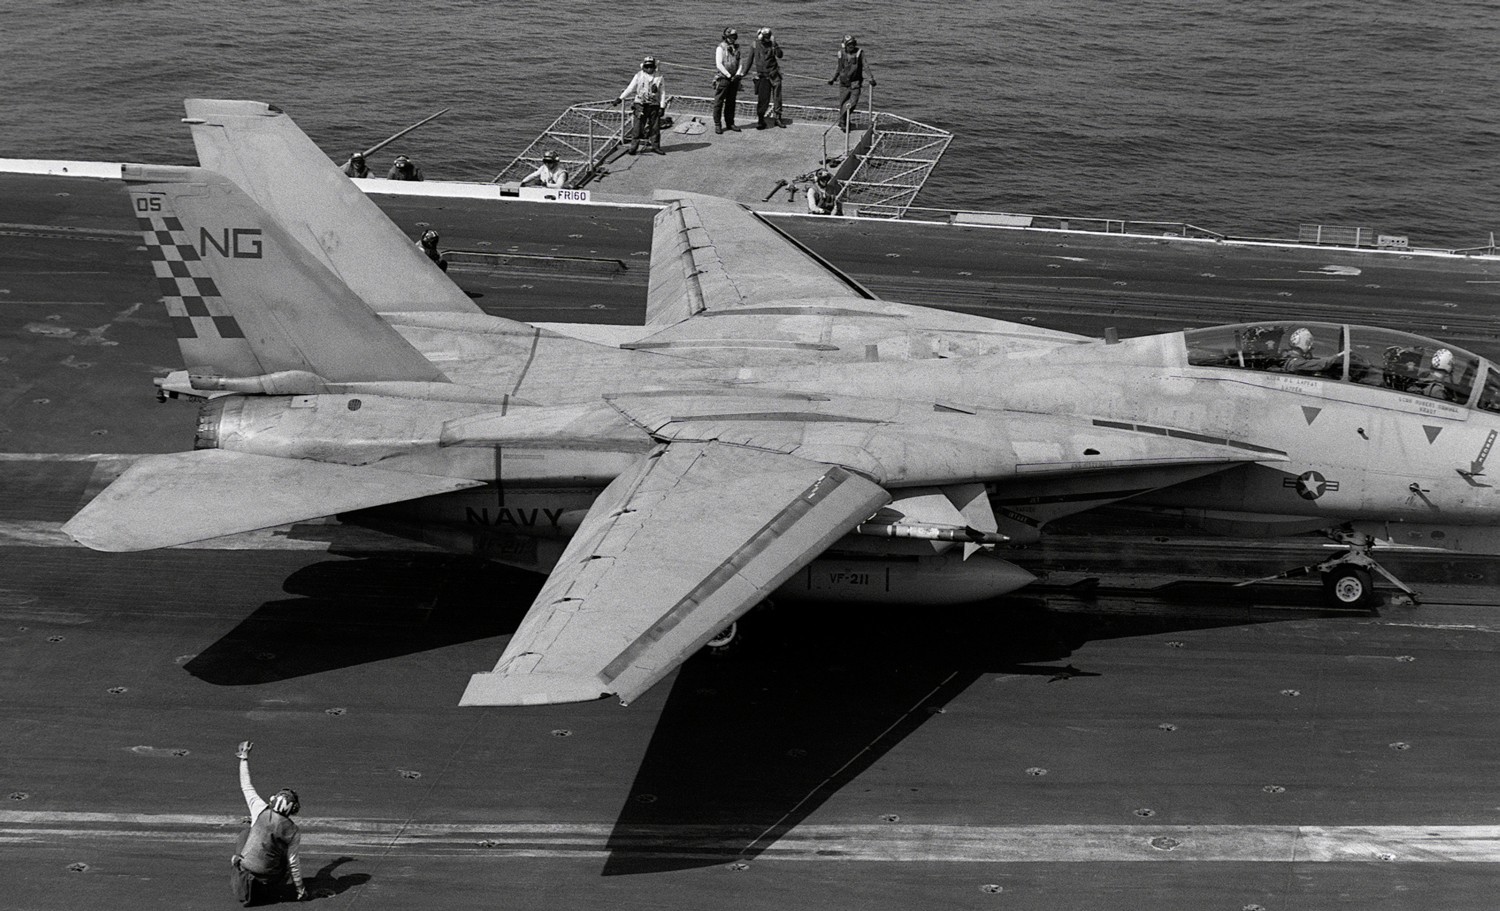 vf-211 fighting checkmates fighter squadron f-14a tomcat us navy carrier air wing cvw-9 uss kitty hawk cv-63 73